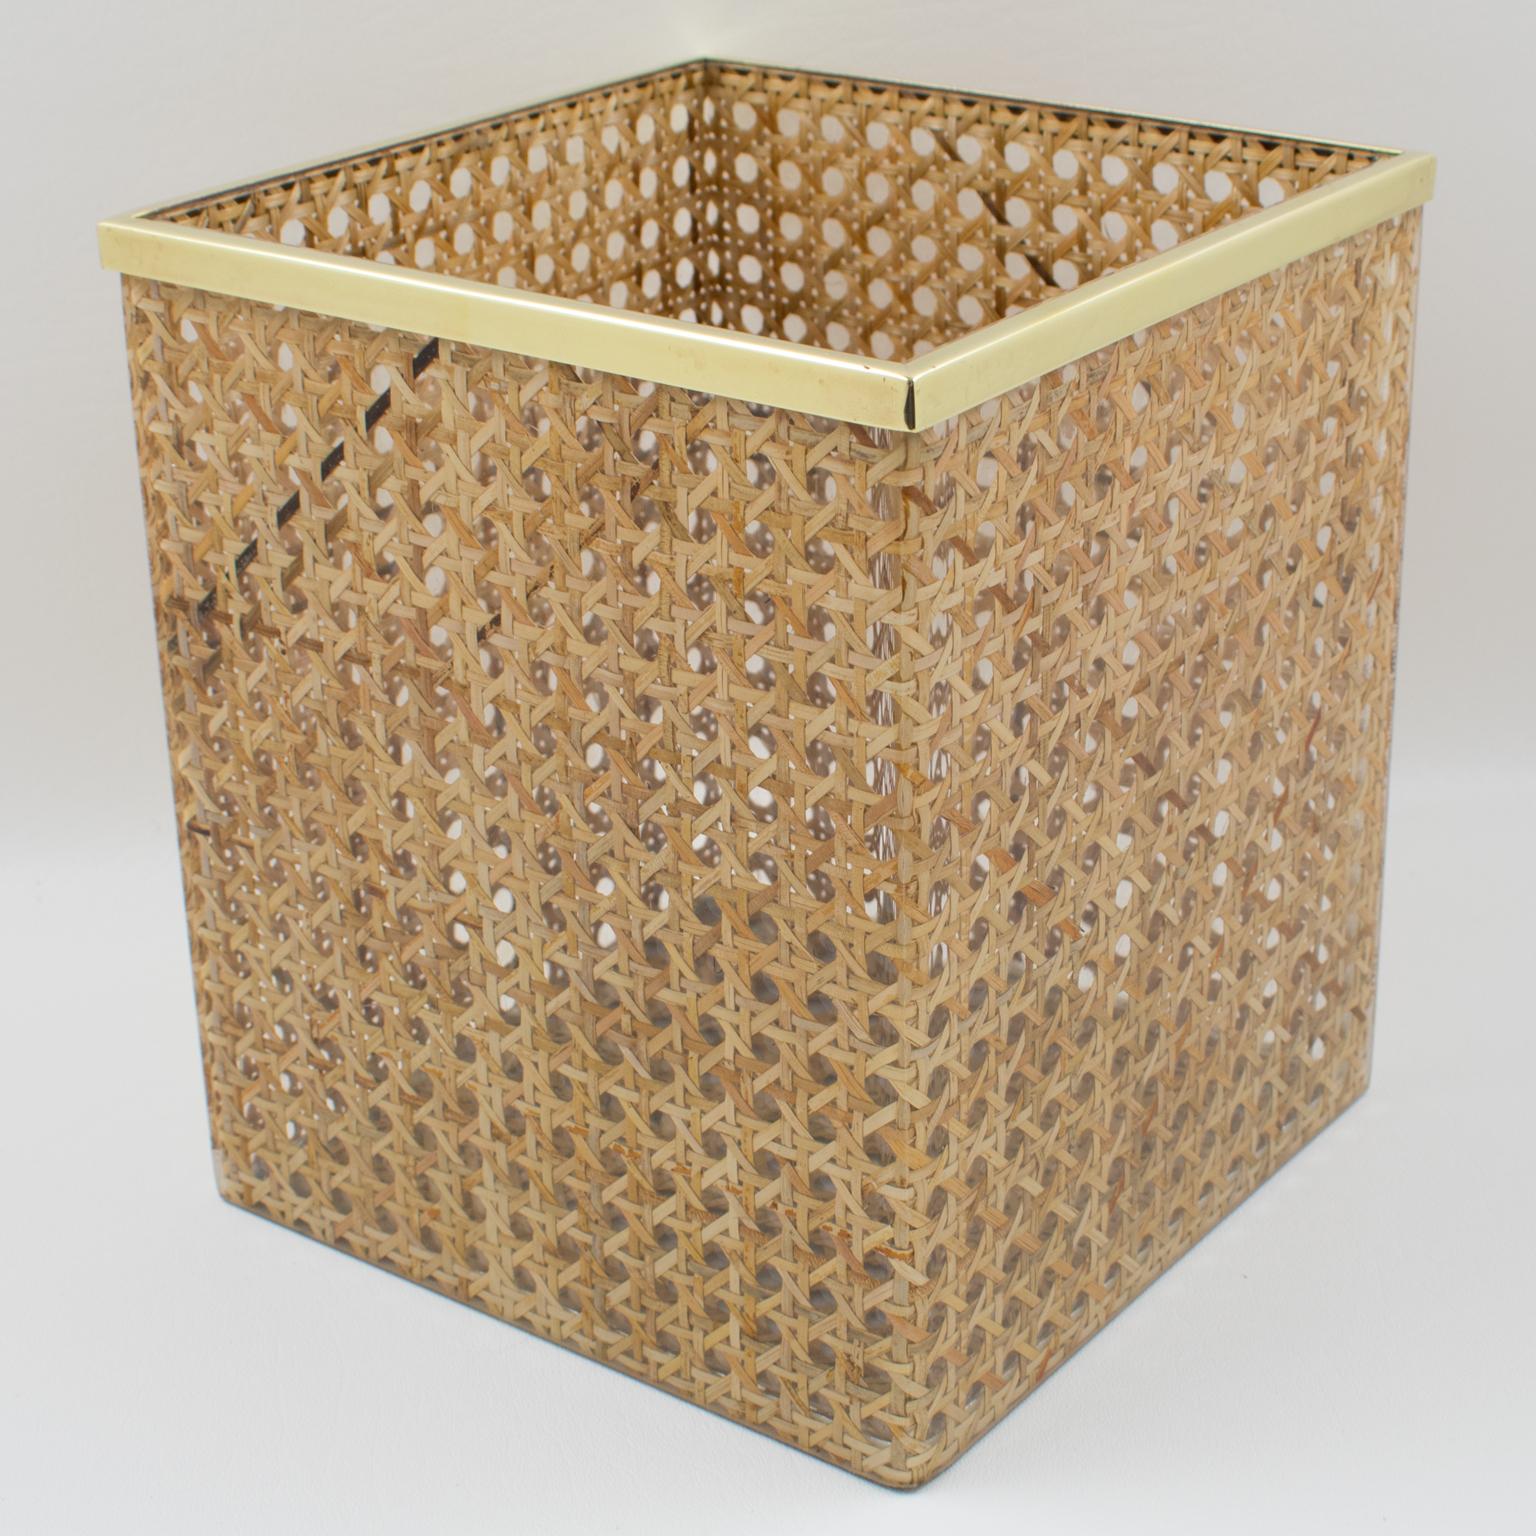 Christian Dior Home Collection 1970s Lucite and Rattan Waste Basket 1